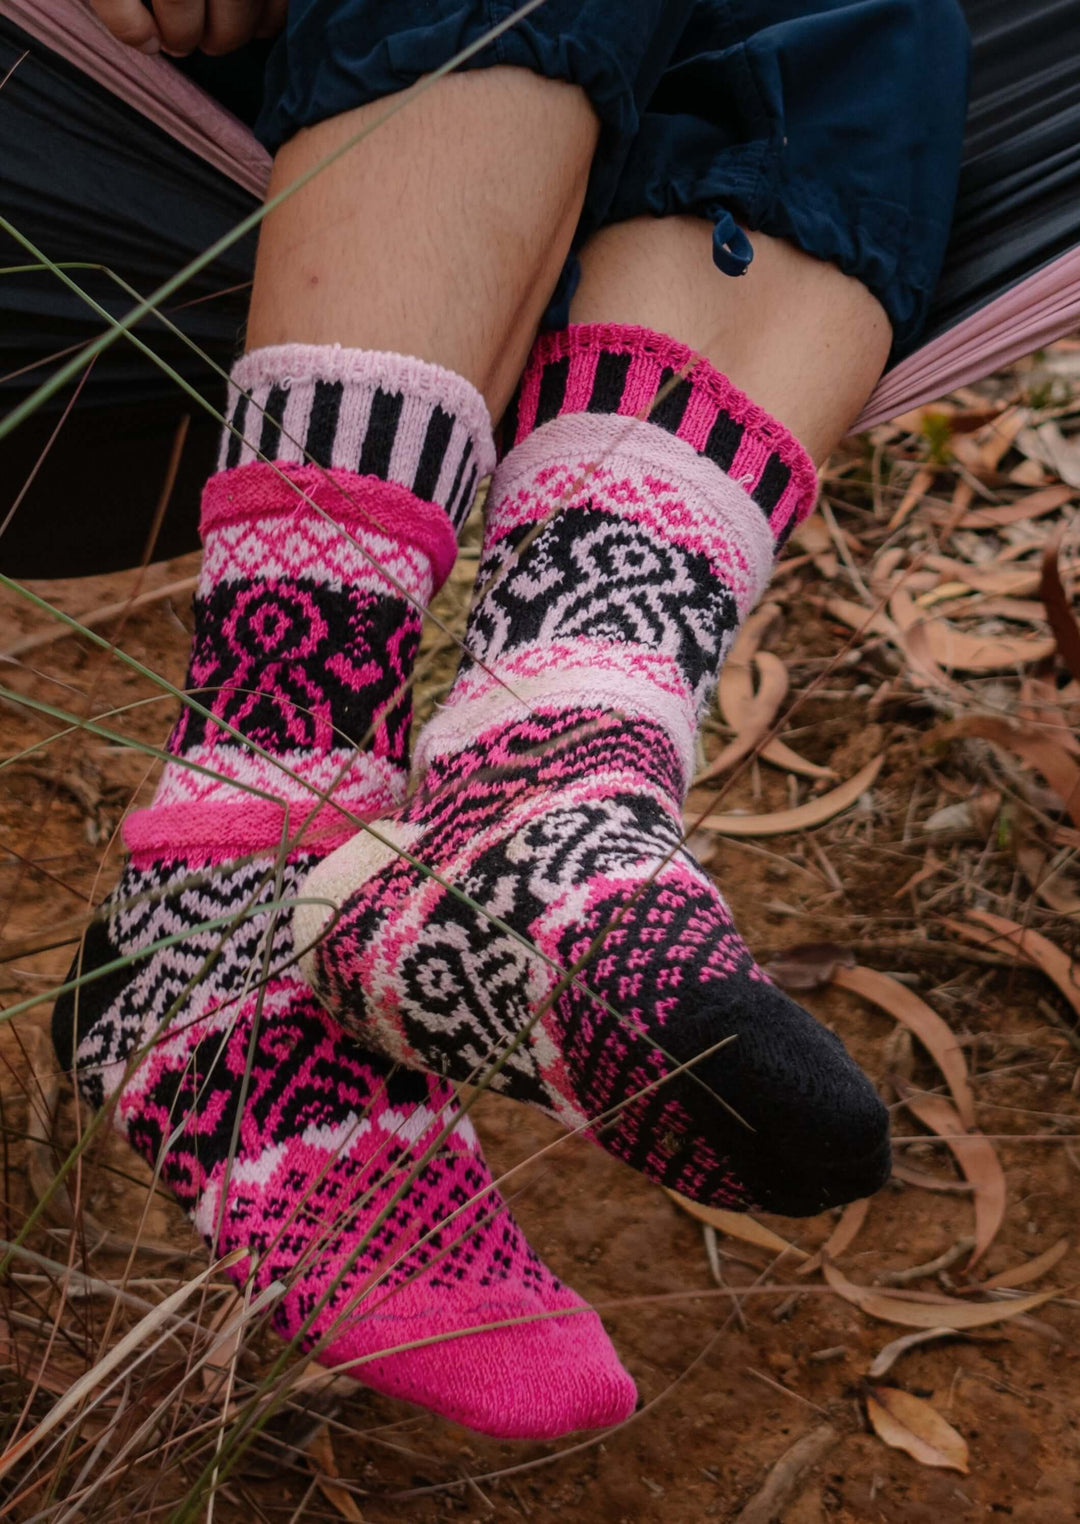 Solmate Socks PINKTOBER Knitted Crew Socks Proudly Made USA | These socks are delightfully mismatched & so very comfortable. American Made Clothing